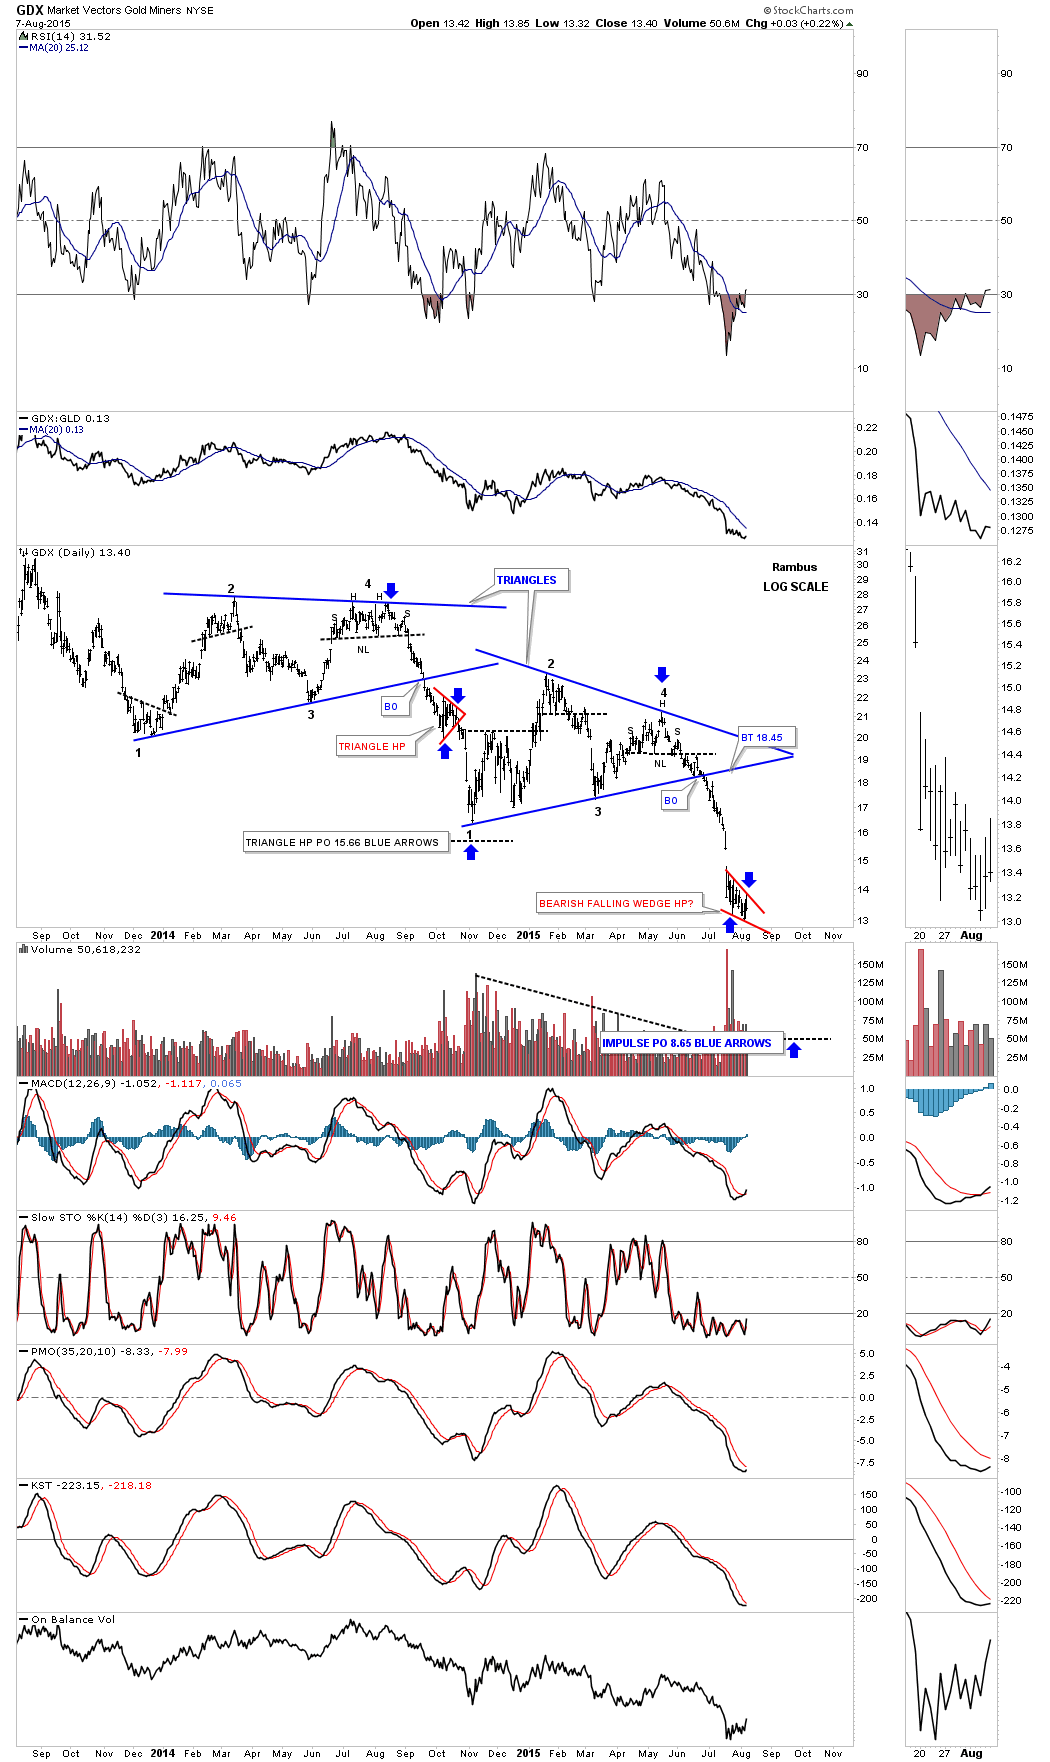 GDX Daily 2013-2015 with Triangle Halfway Pattern